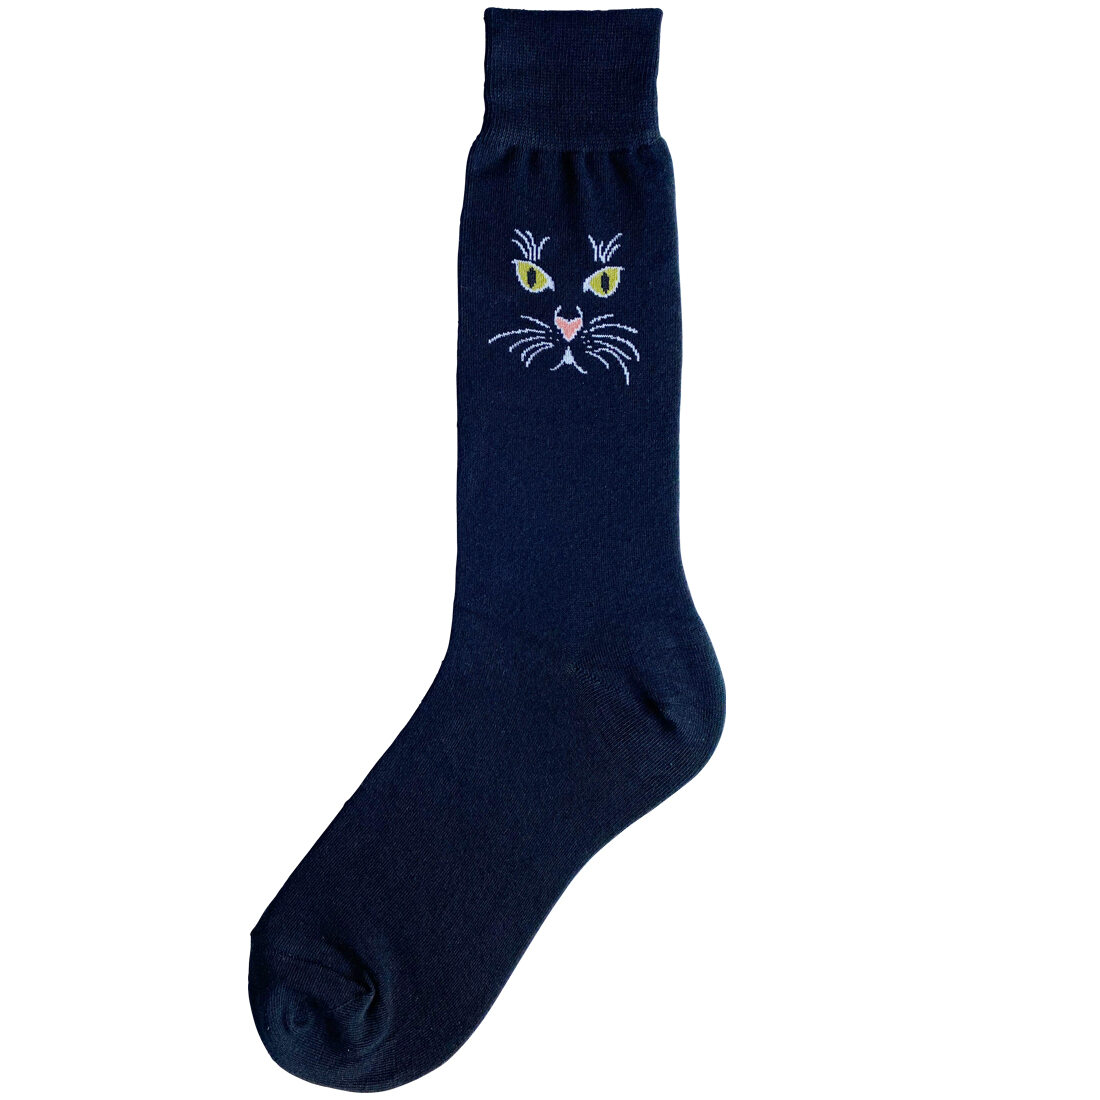 Simple and fun men's socks with cat face on black.